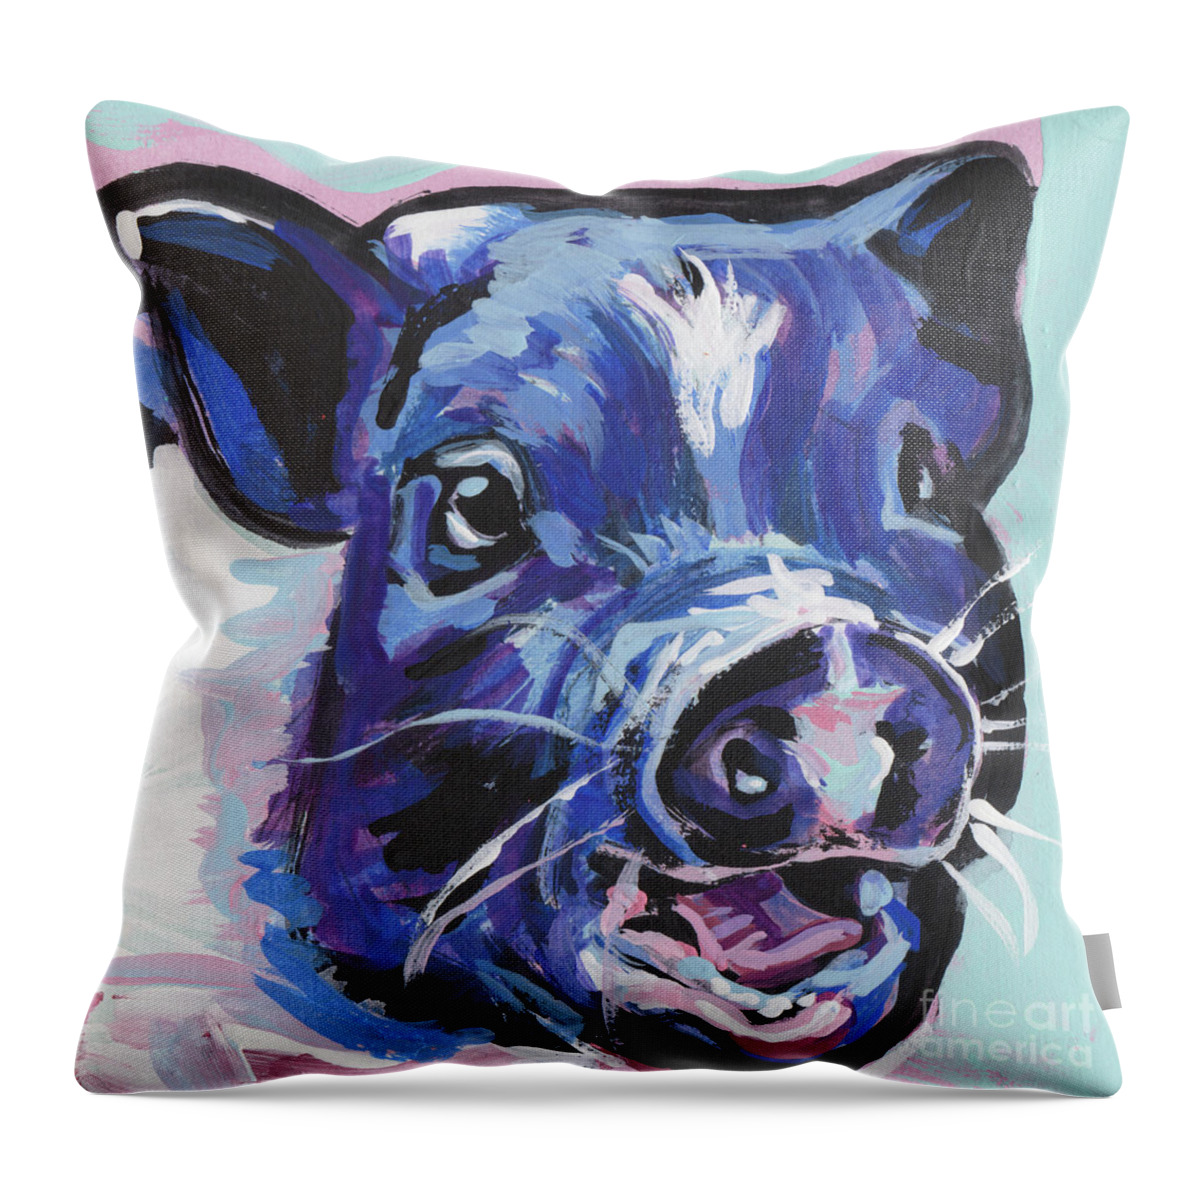 Mini Pig Throw Pillow featuring the painting This Little Piggy by Lea